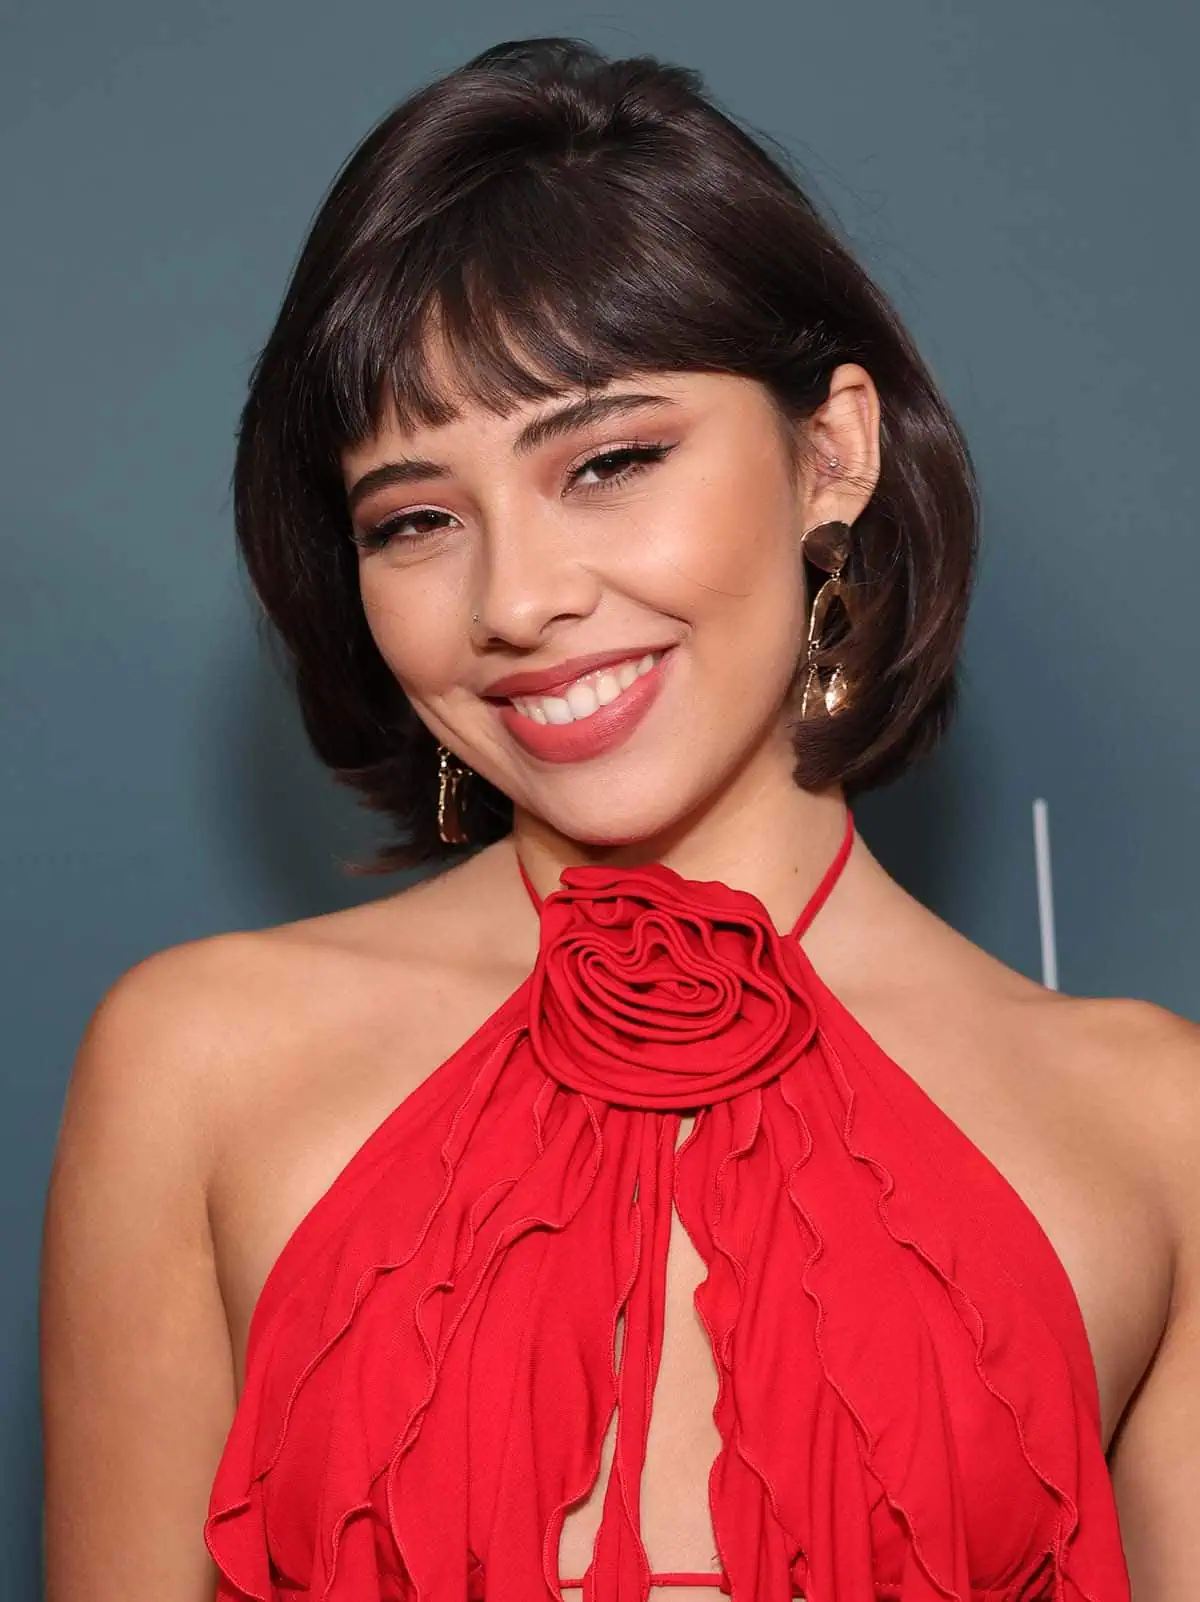 Xochitl Gomez wears coordinating reddish-brown makeup with a retro-style bouffant bob and her signature blunt bangs